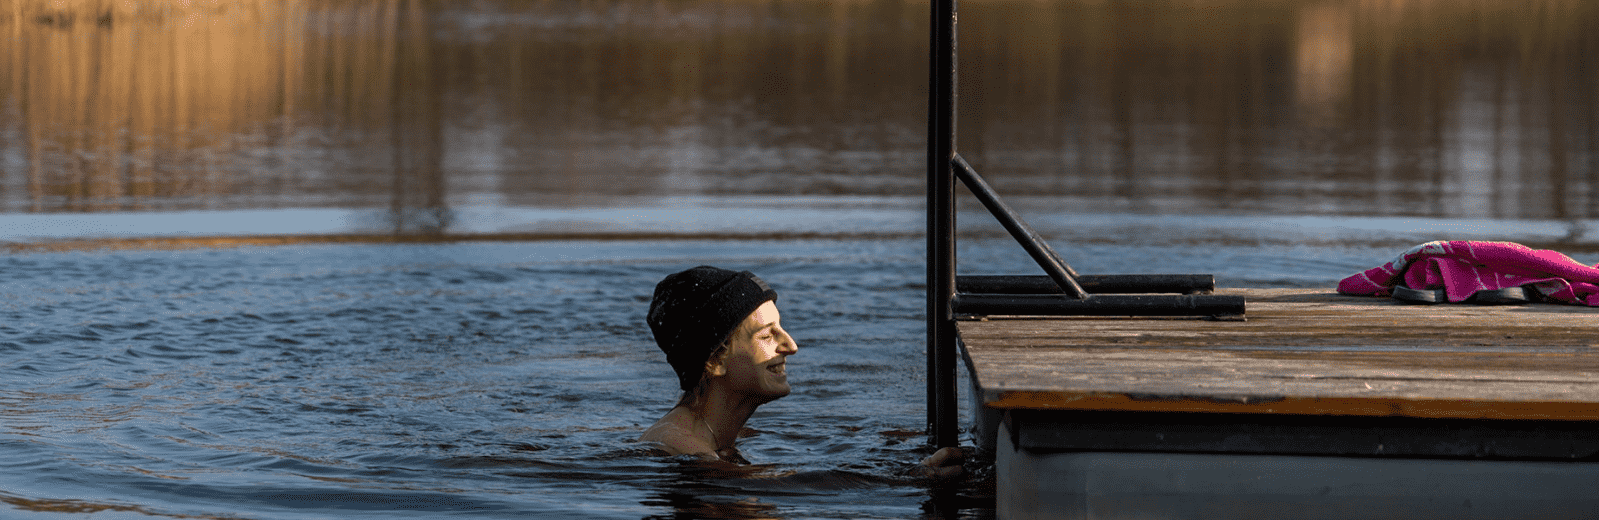 girl enjoys cold water dipping in latvia